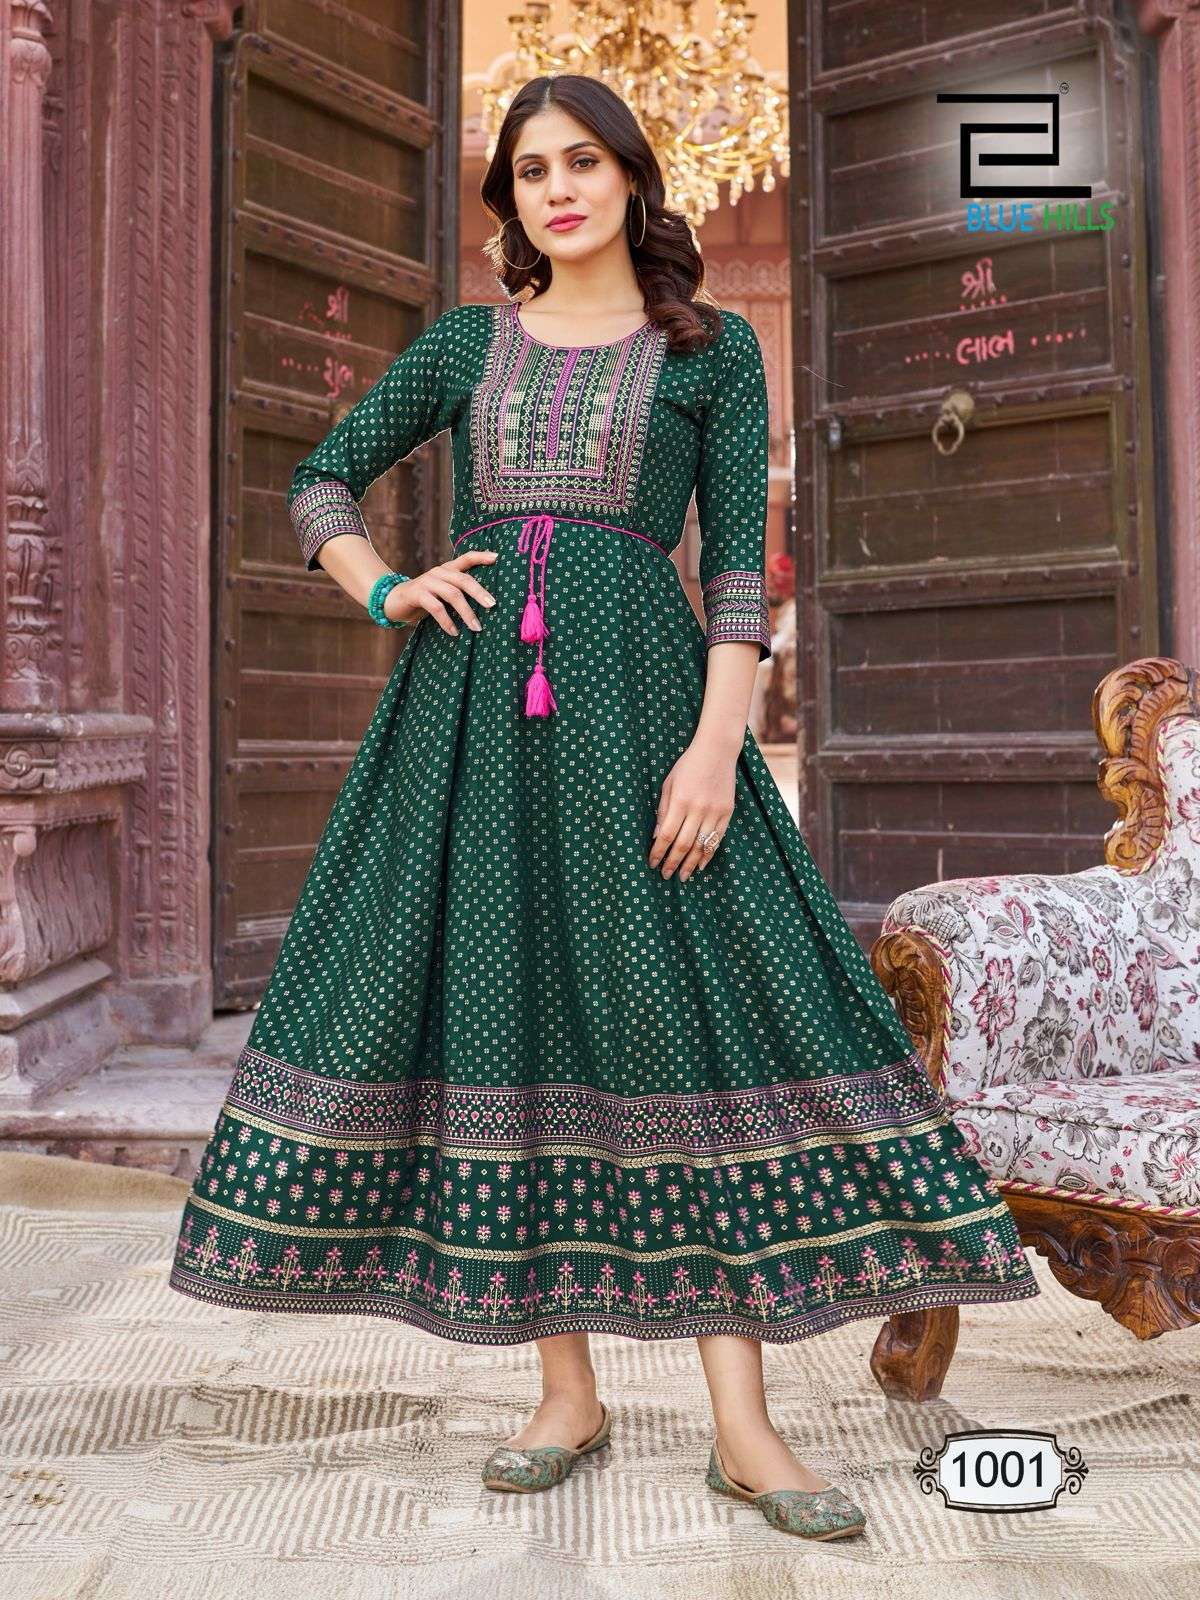 GLAMOURS%2014KG%20RAYON%20FOIL%20PRINTED%20EMBROIDERY%20WORK%20ANARKALI%20STYLE%20KURTI%20WITH%20BELT%20BY%20BLUE%20HILLS%20BRAND%201001 0 2024 02 02 16 08 32